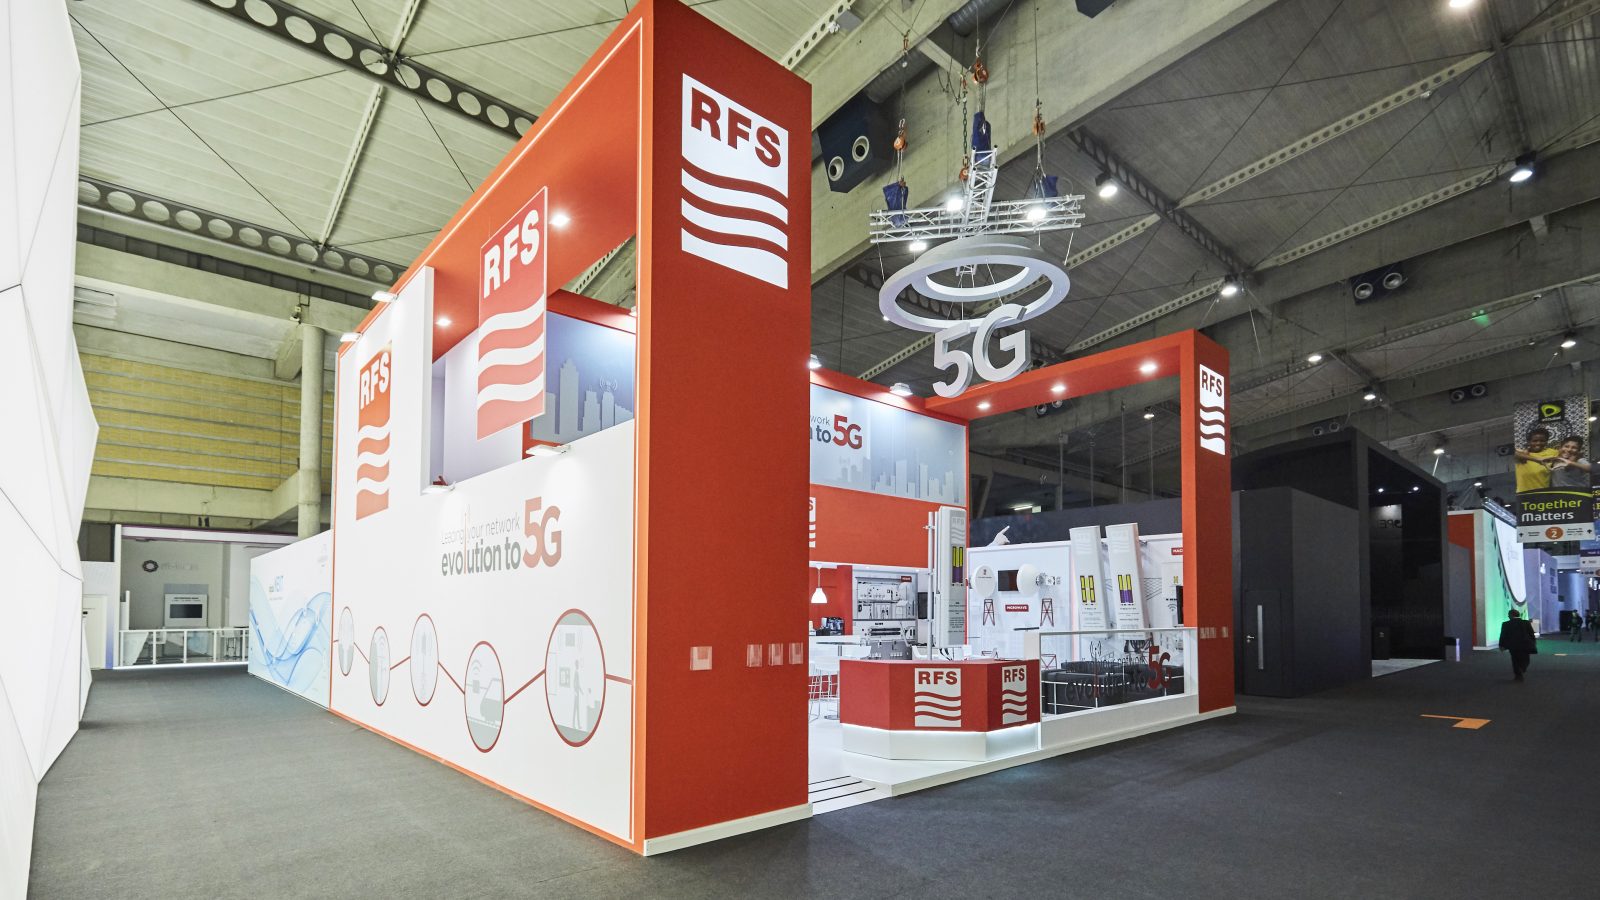 RFS booth at MWC 2019